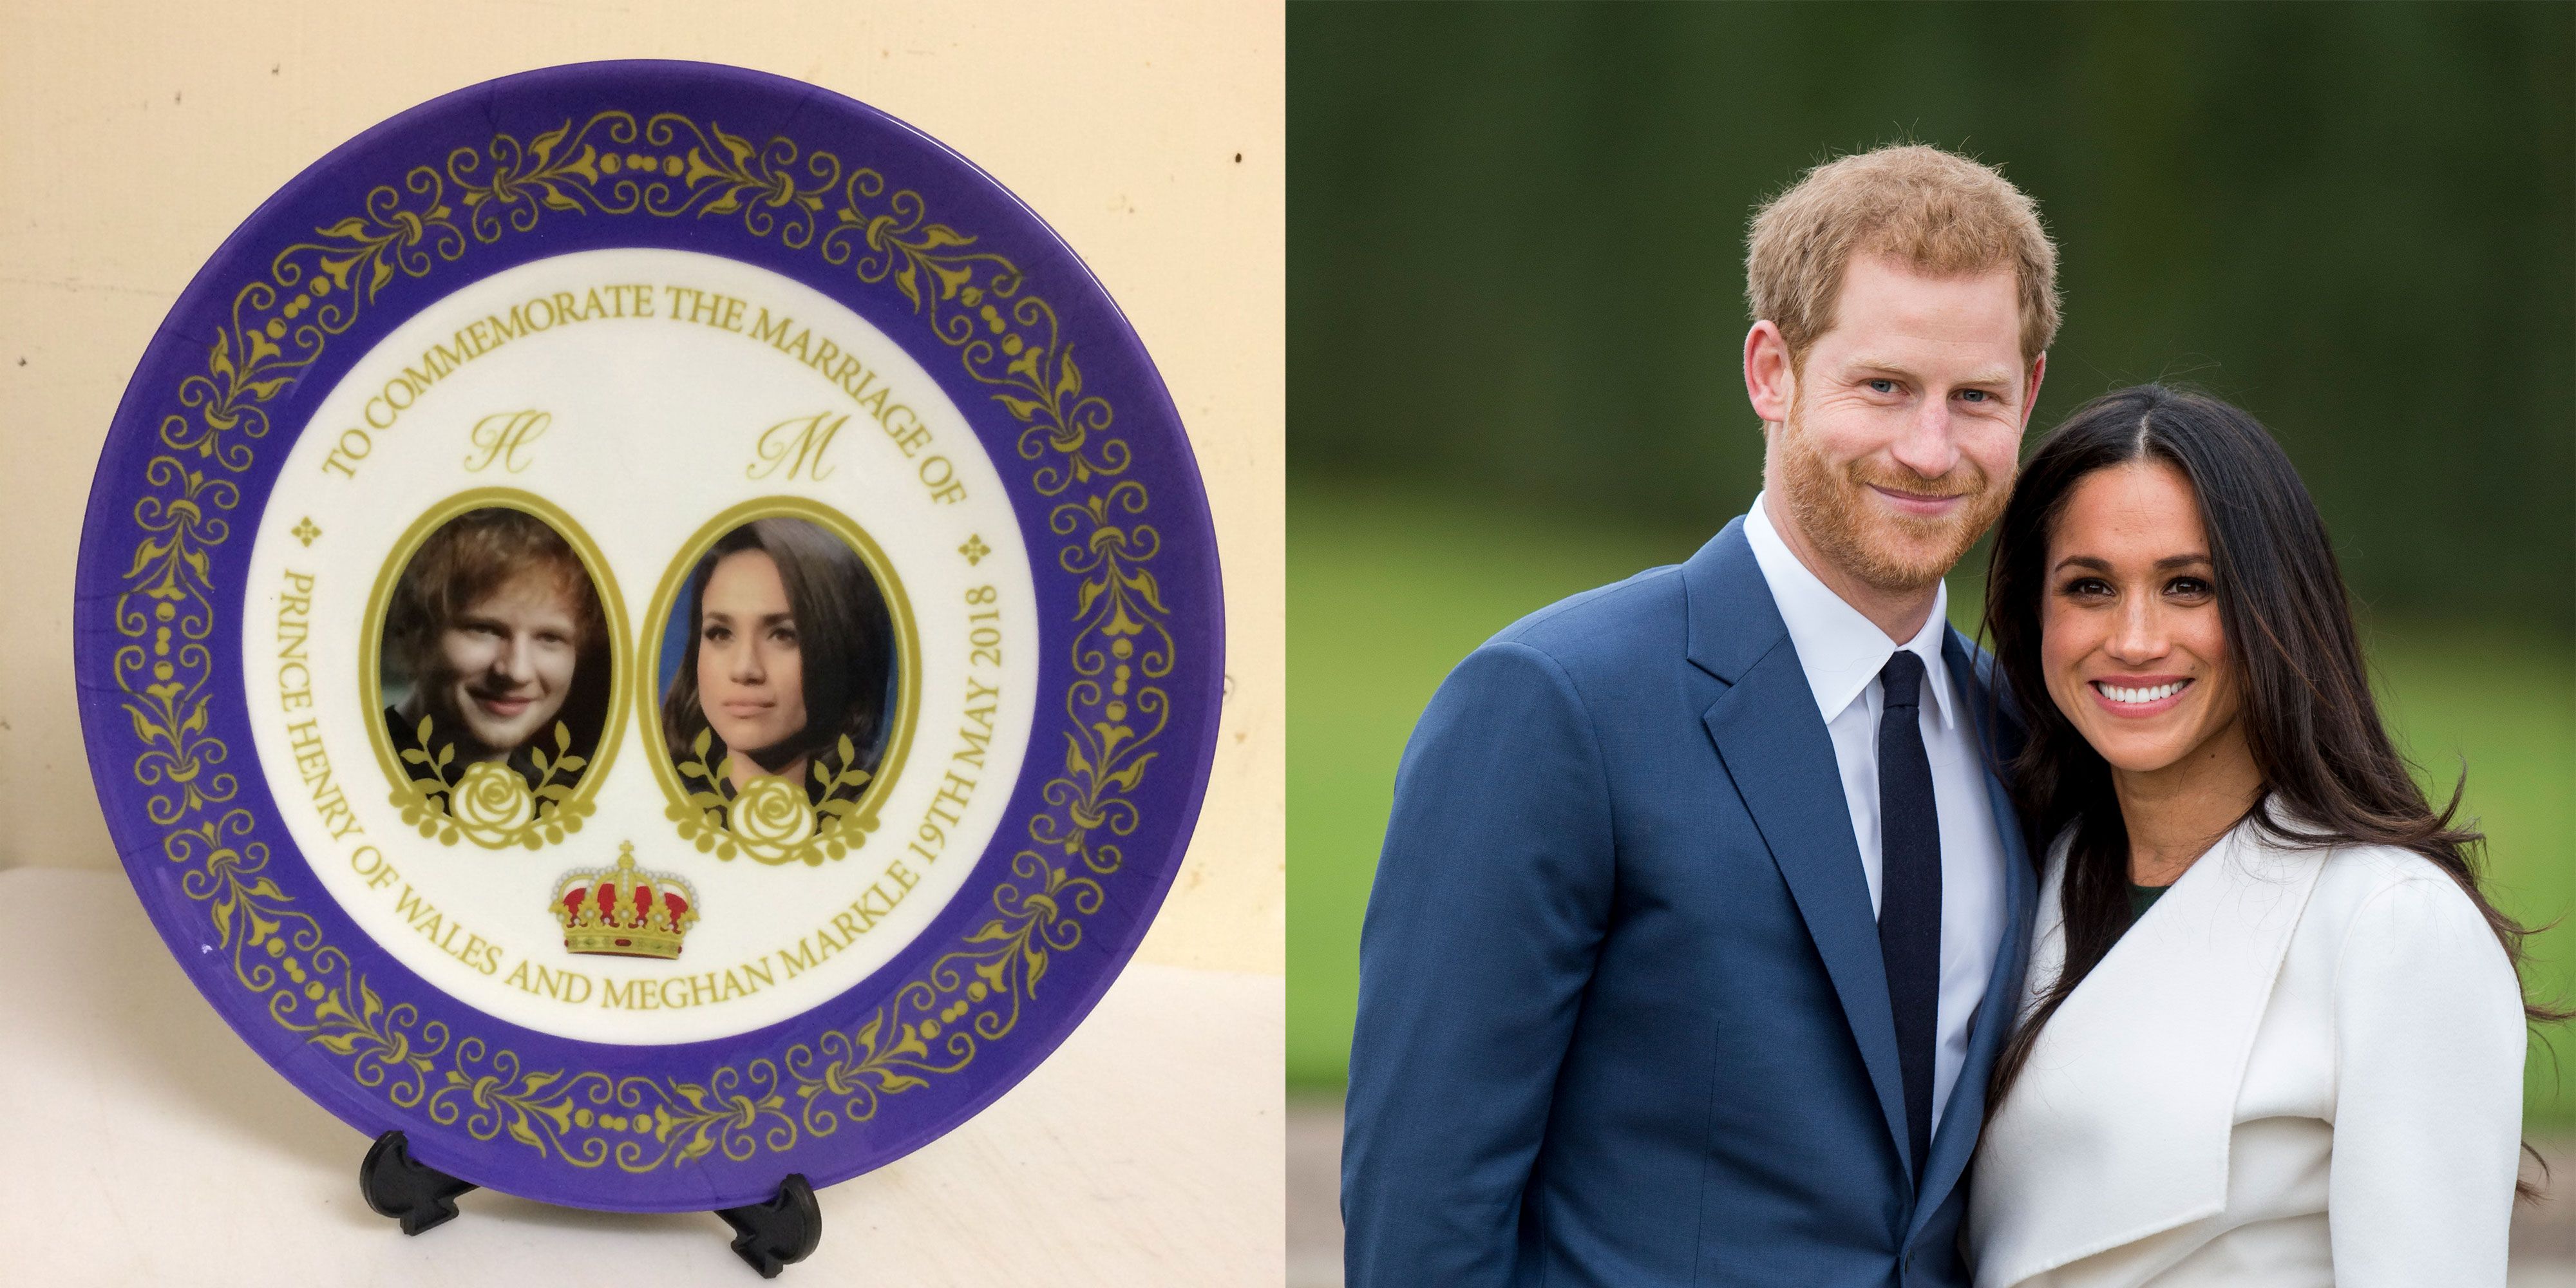 Prince Harry and Meghan Markle commemorative wedding plate 2 sizes 